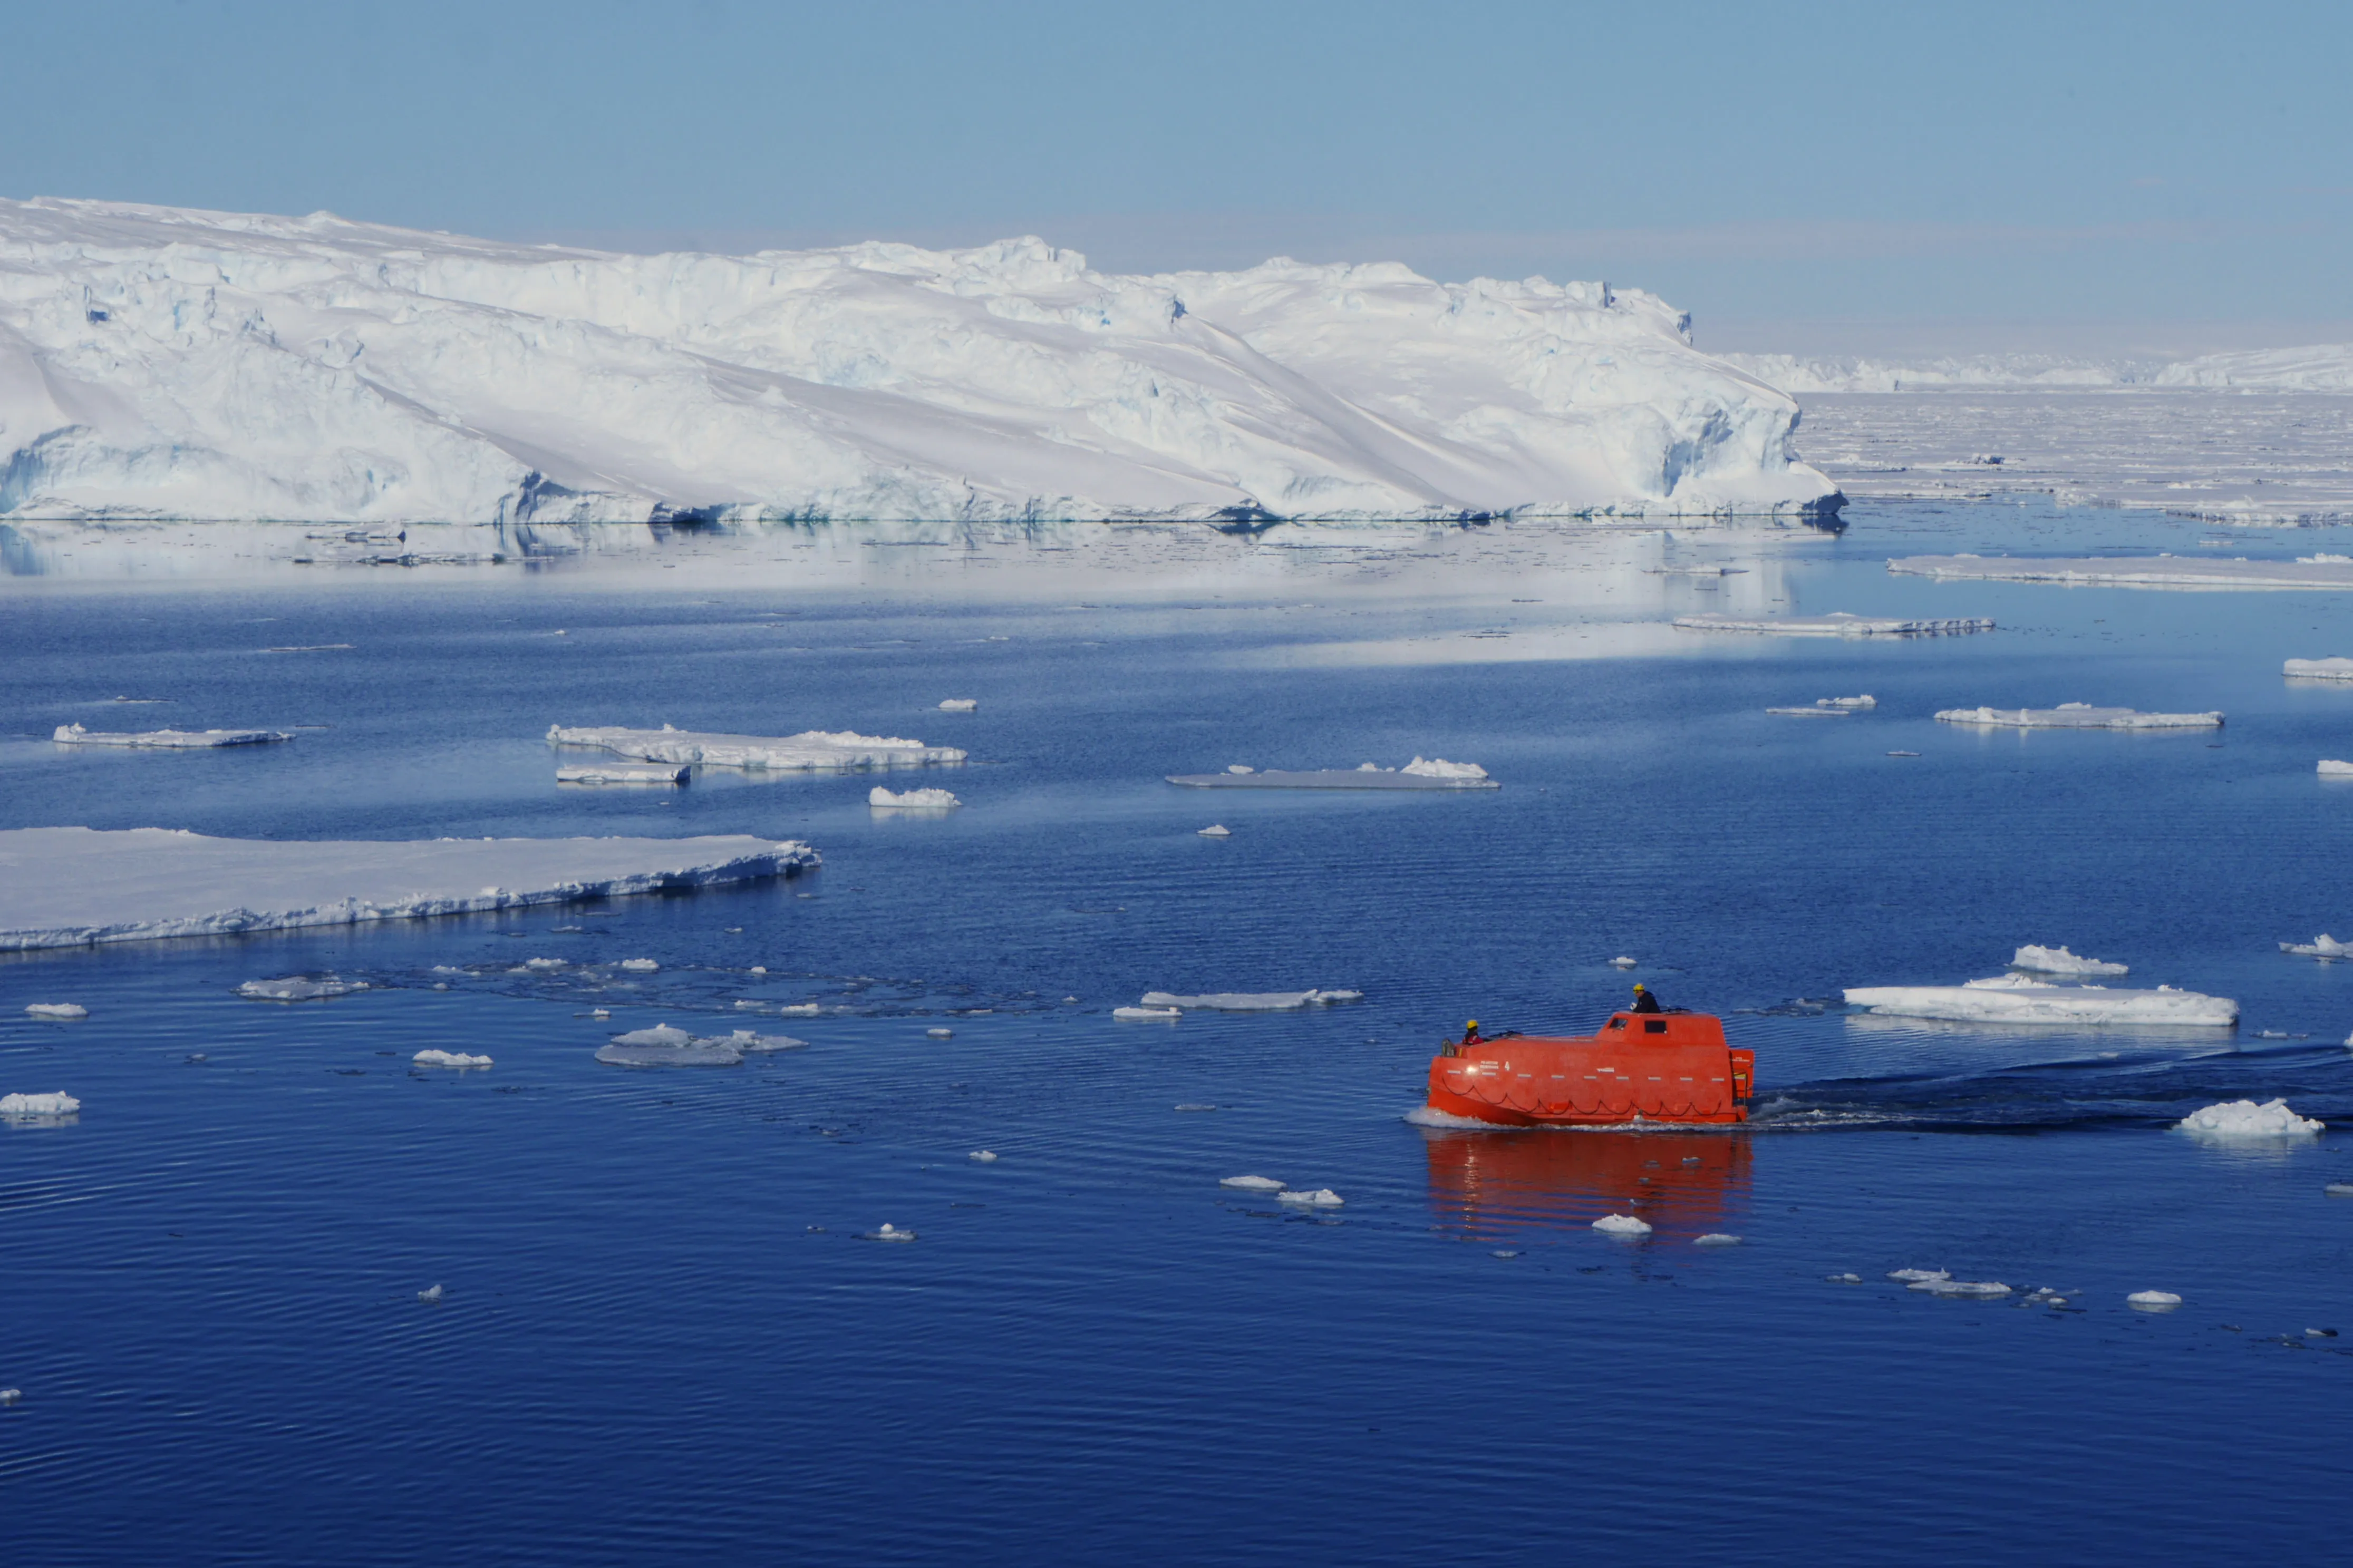 An orange ship's lifeboat motors across a still blue bay against a backdrop of bright white ice and snow.